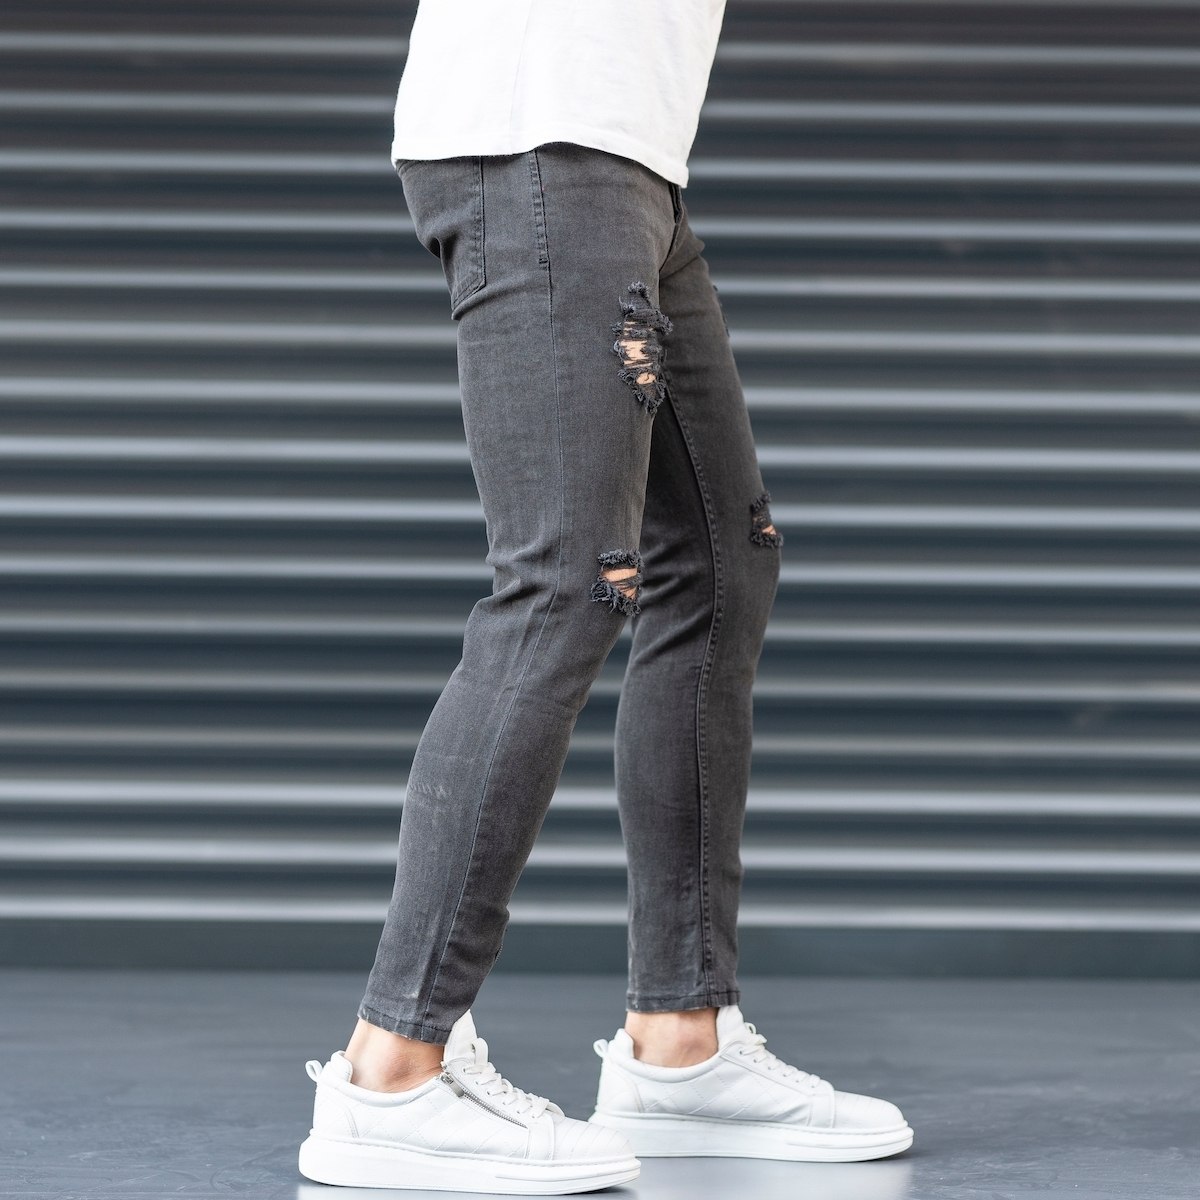 Grey, Men's Jeans, Ripped & Skinny Jeans